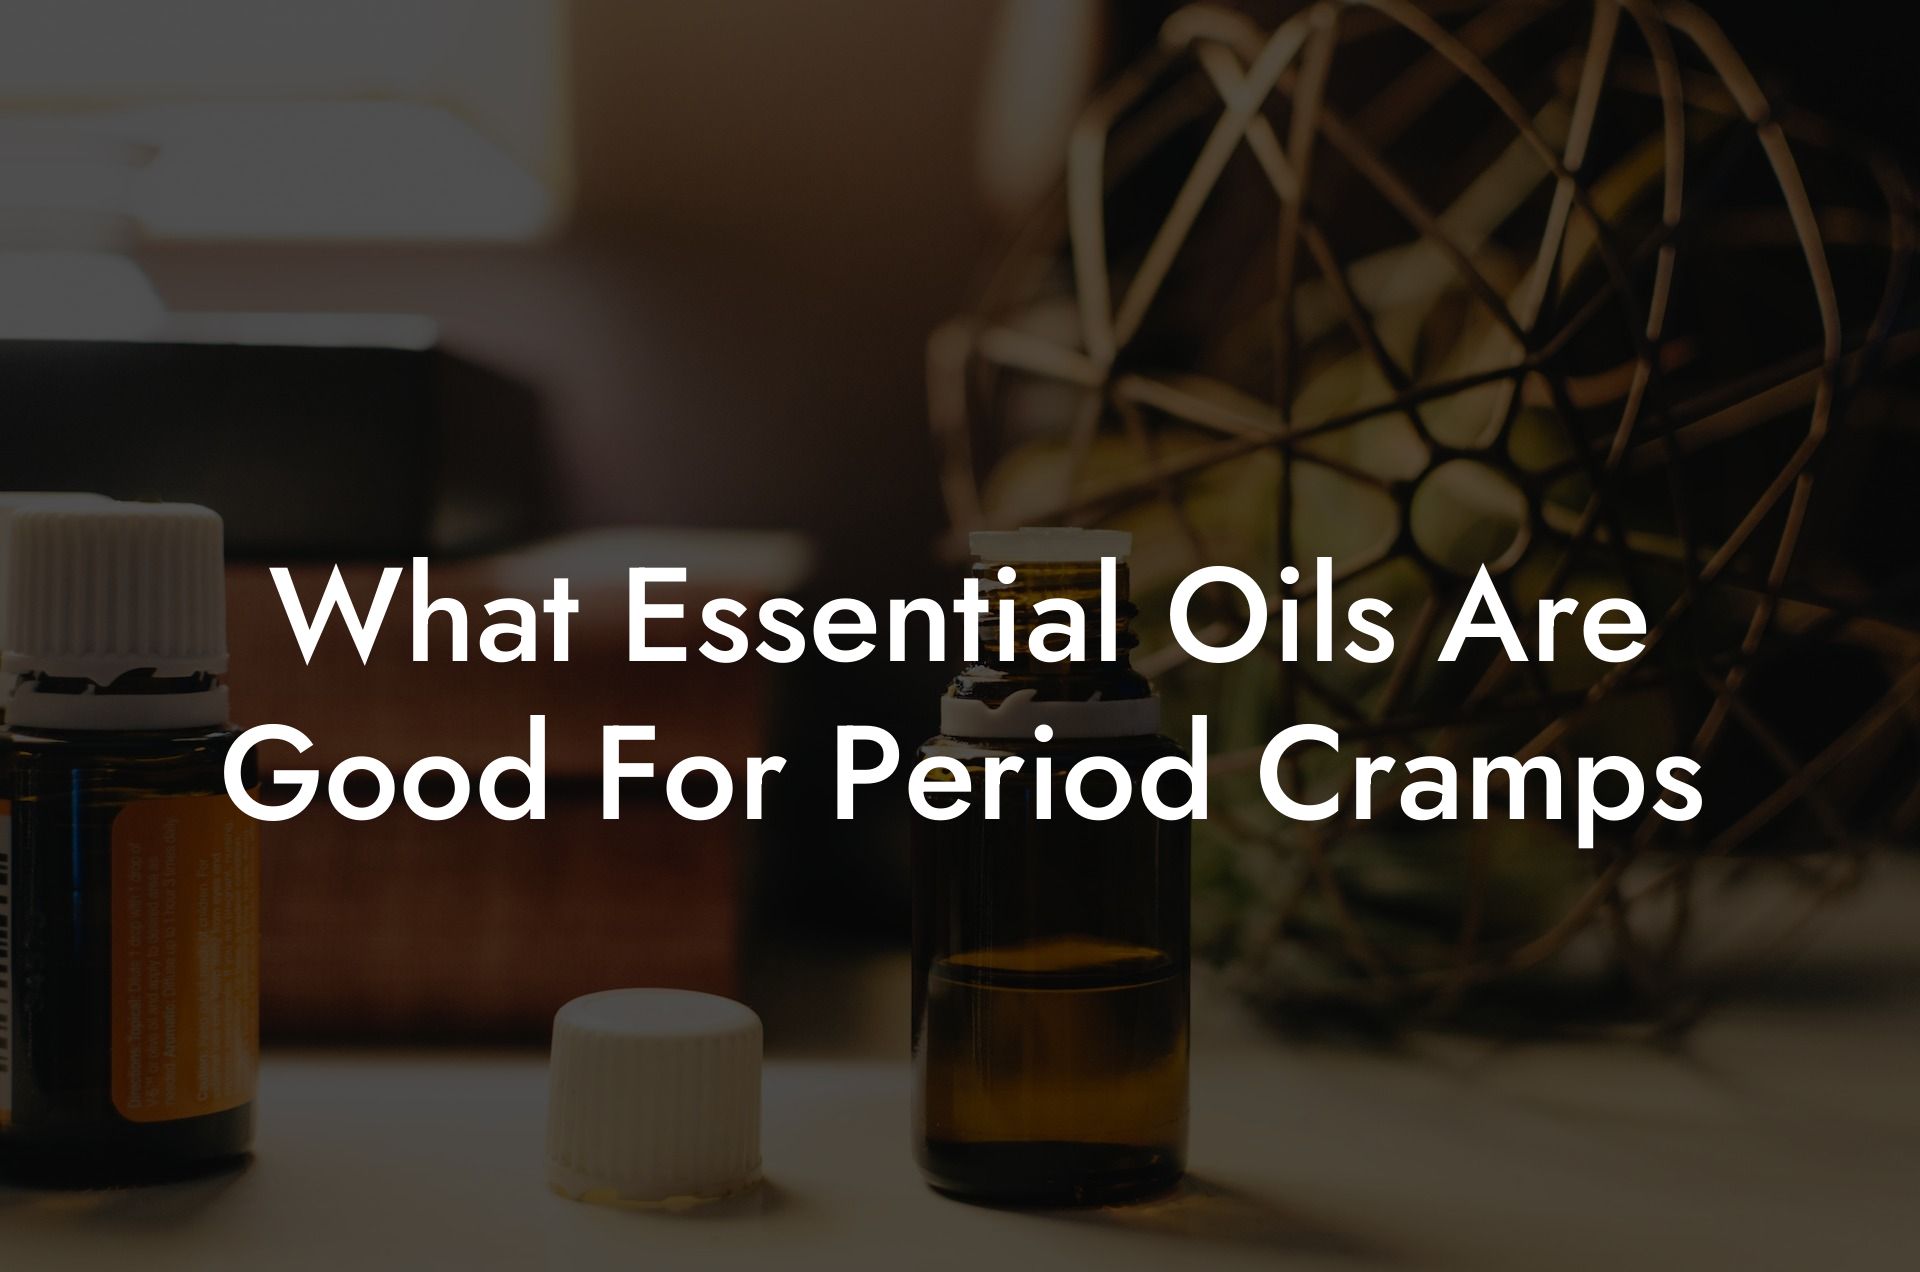 What Essential Oils Are Good For Period Cramps